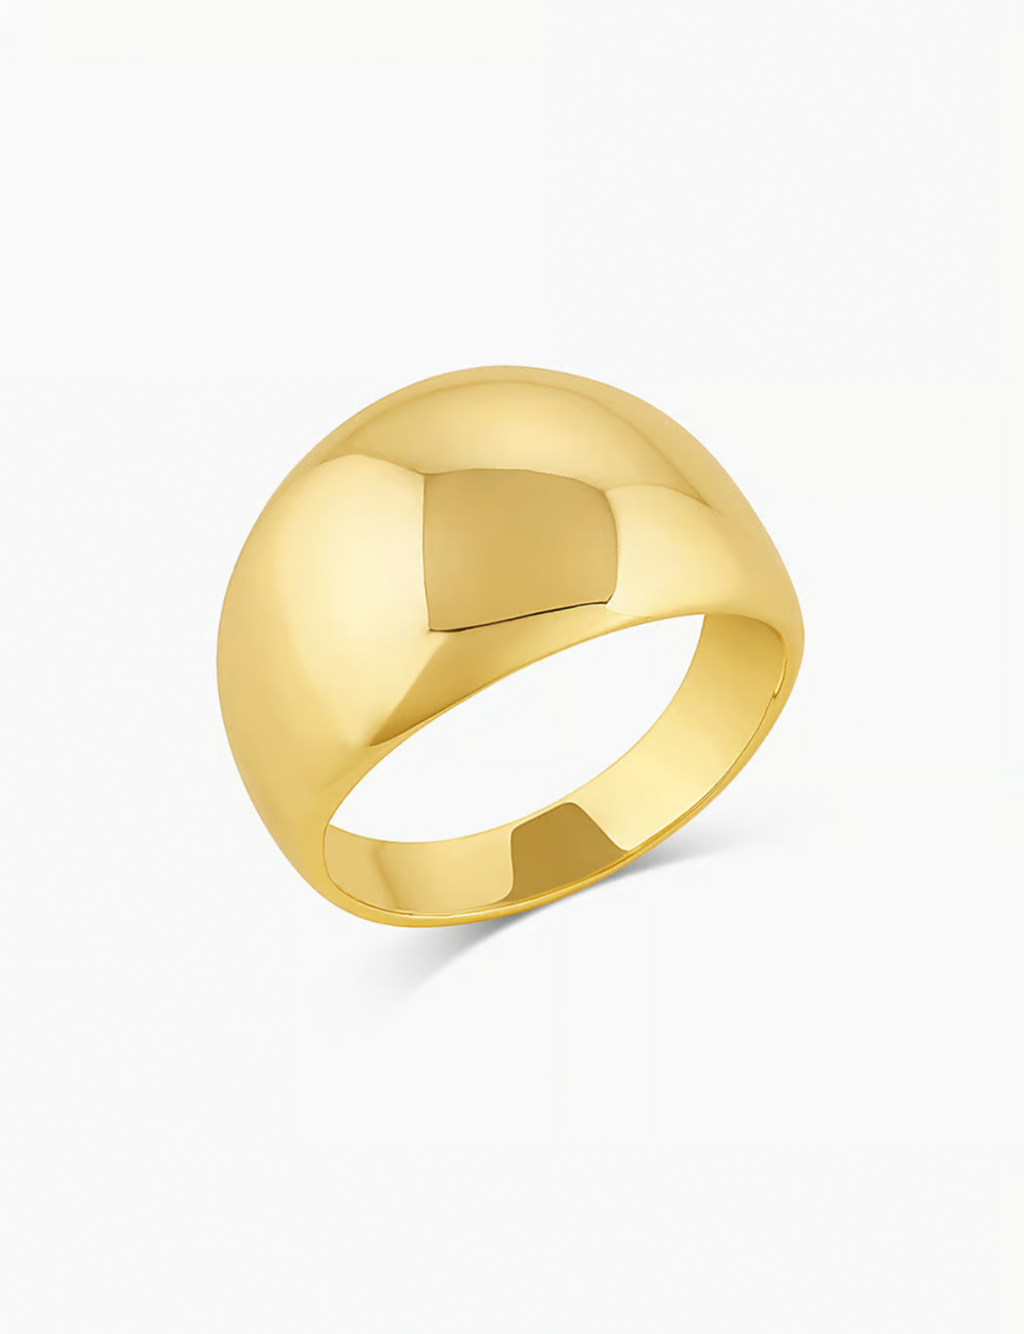 Lou Helium Ring, Gold Plated